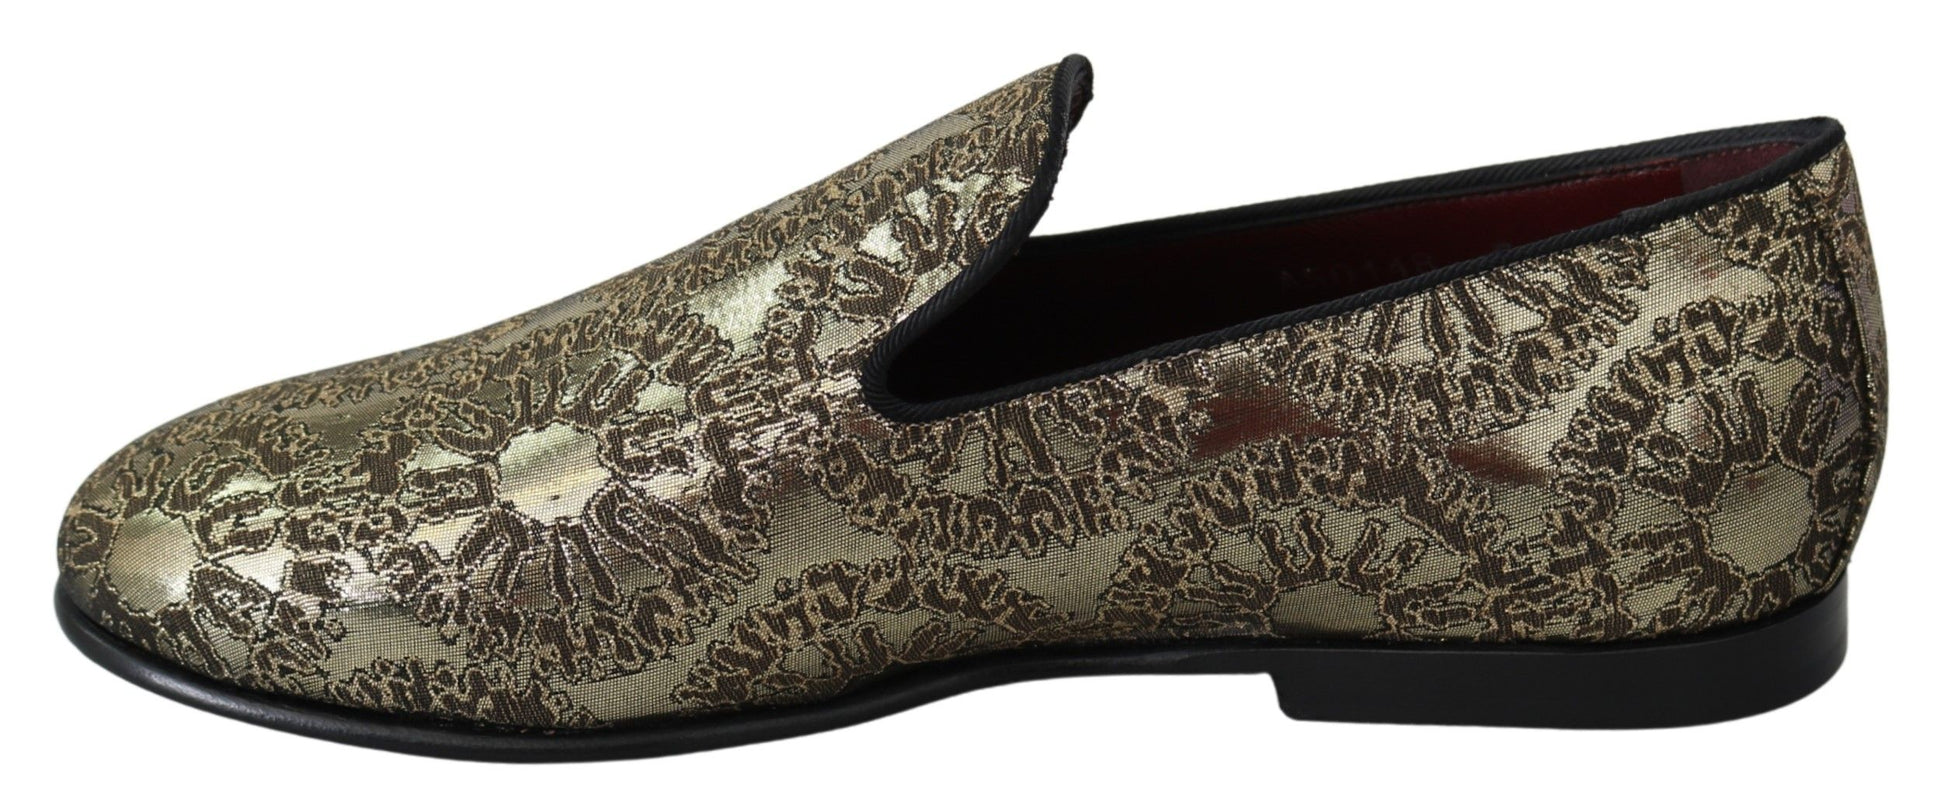 Gold Jacquard Flats Mens Loafers Shoes - Designed by Dolce & Gabbana Available to Buy at a Discounted Price on Moon Behind The Hill Online Designer Discount Store